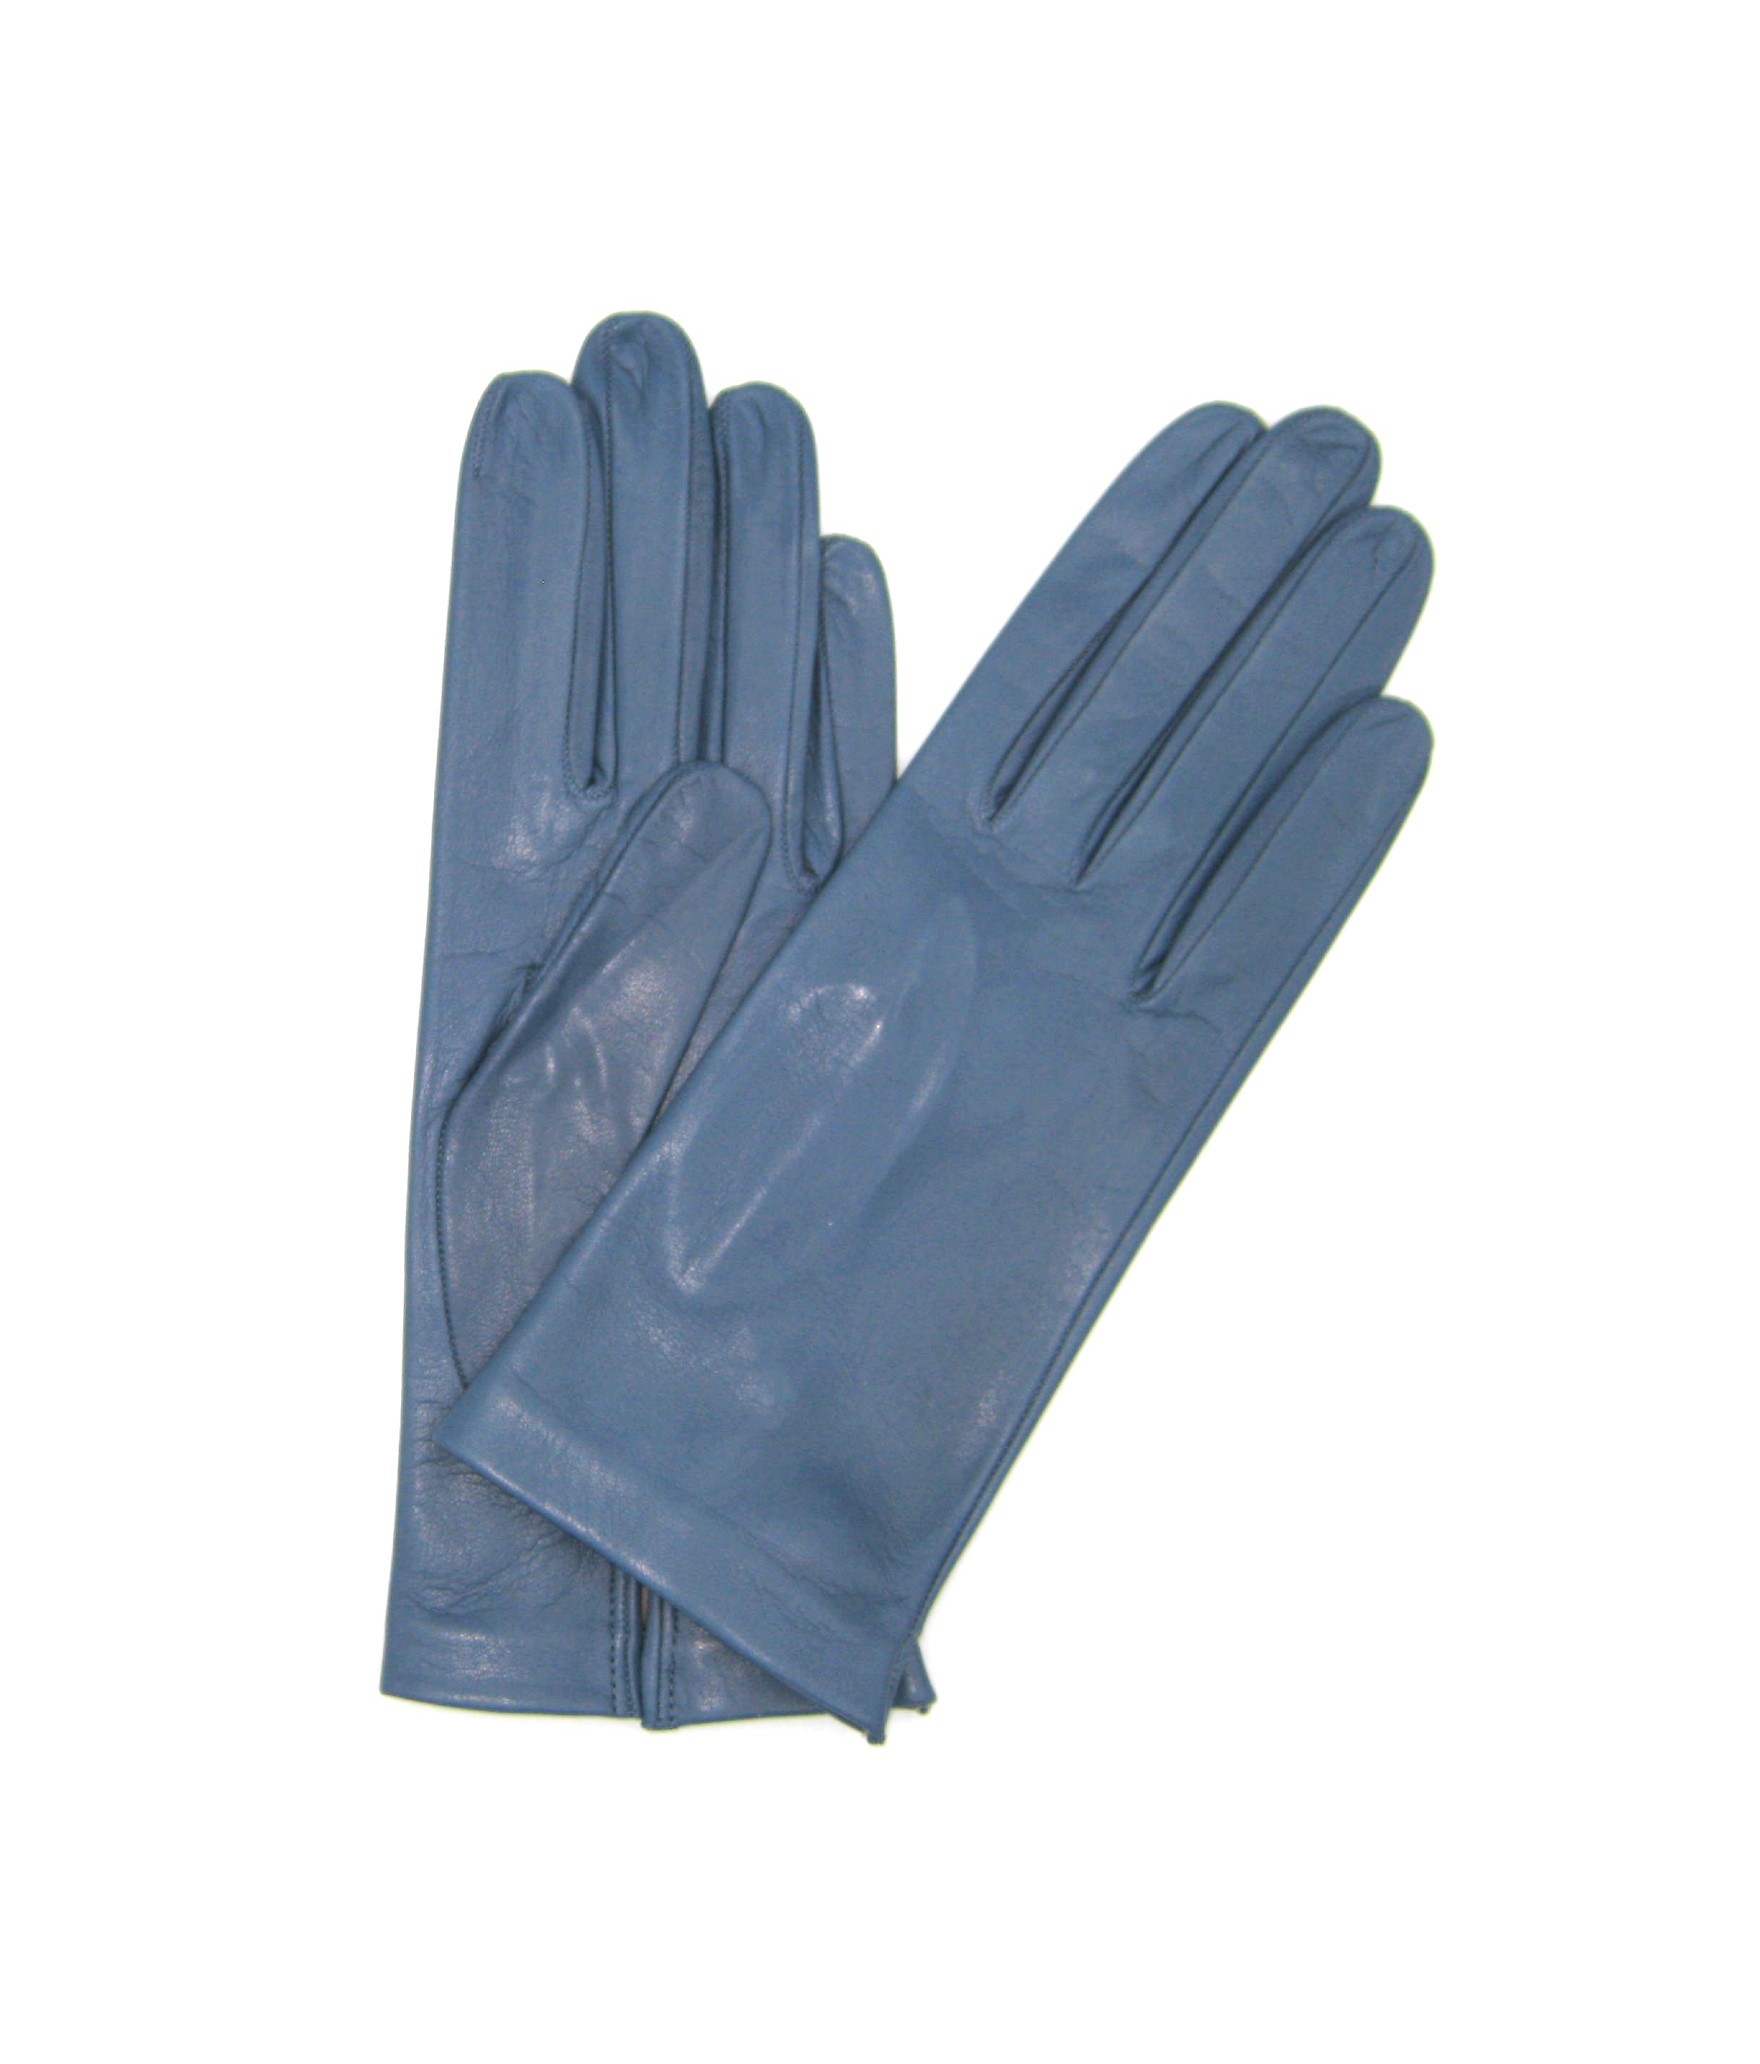 Nappa leather gloves Silk lined   Denim